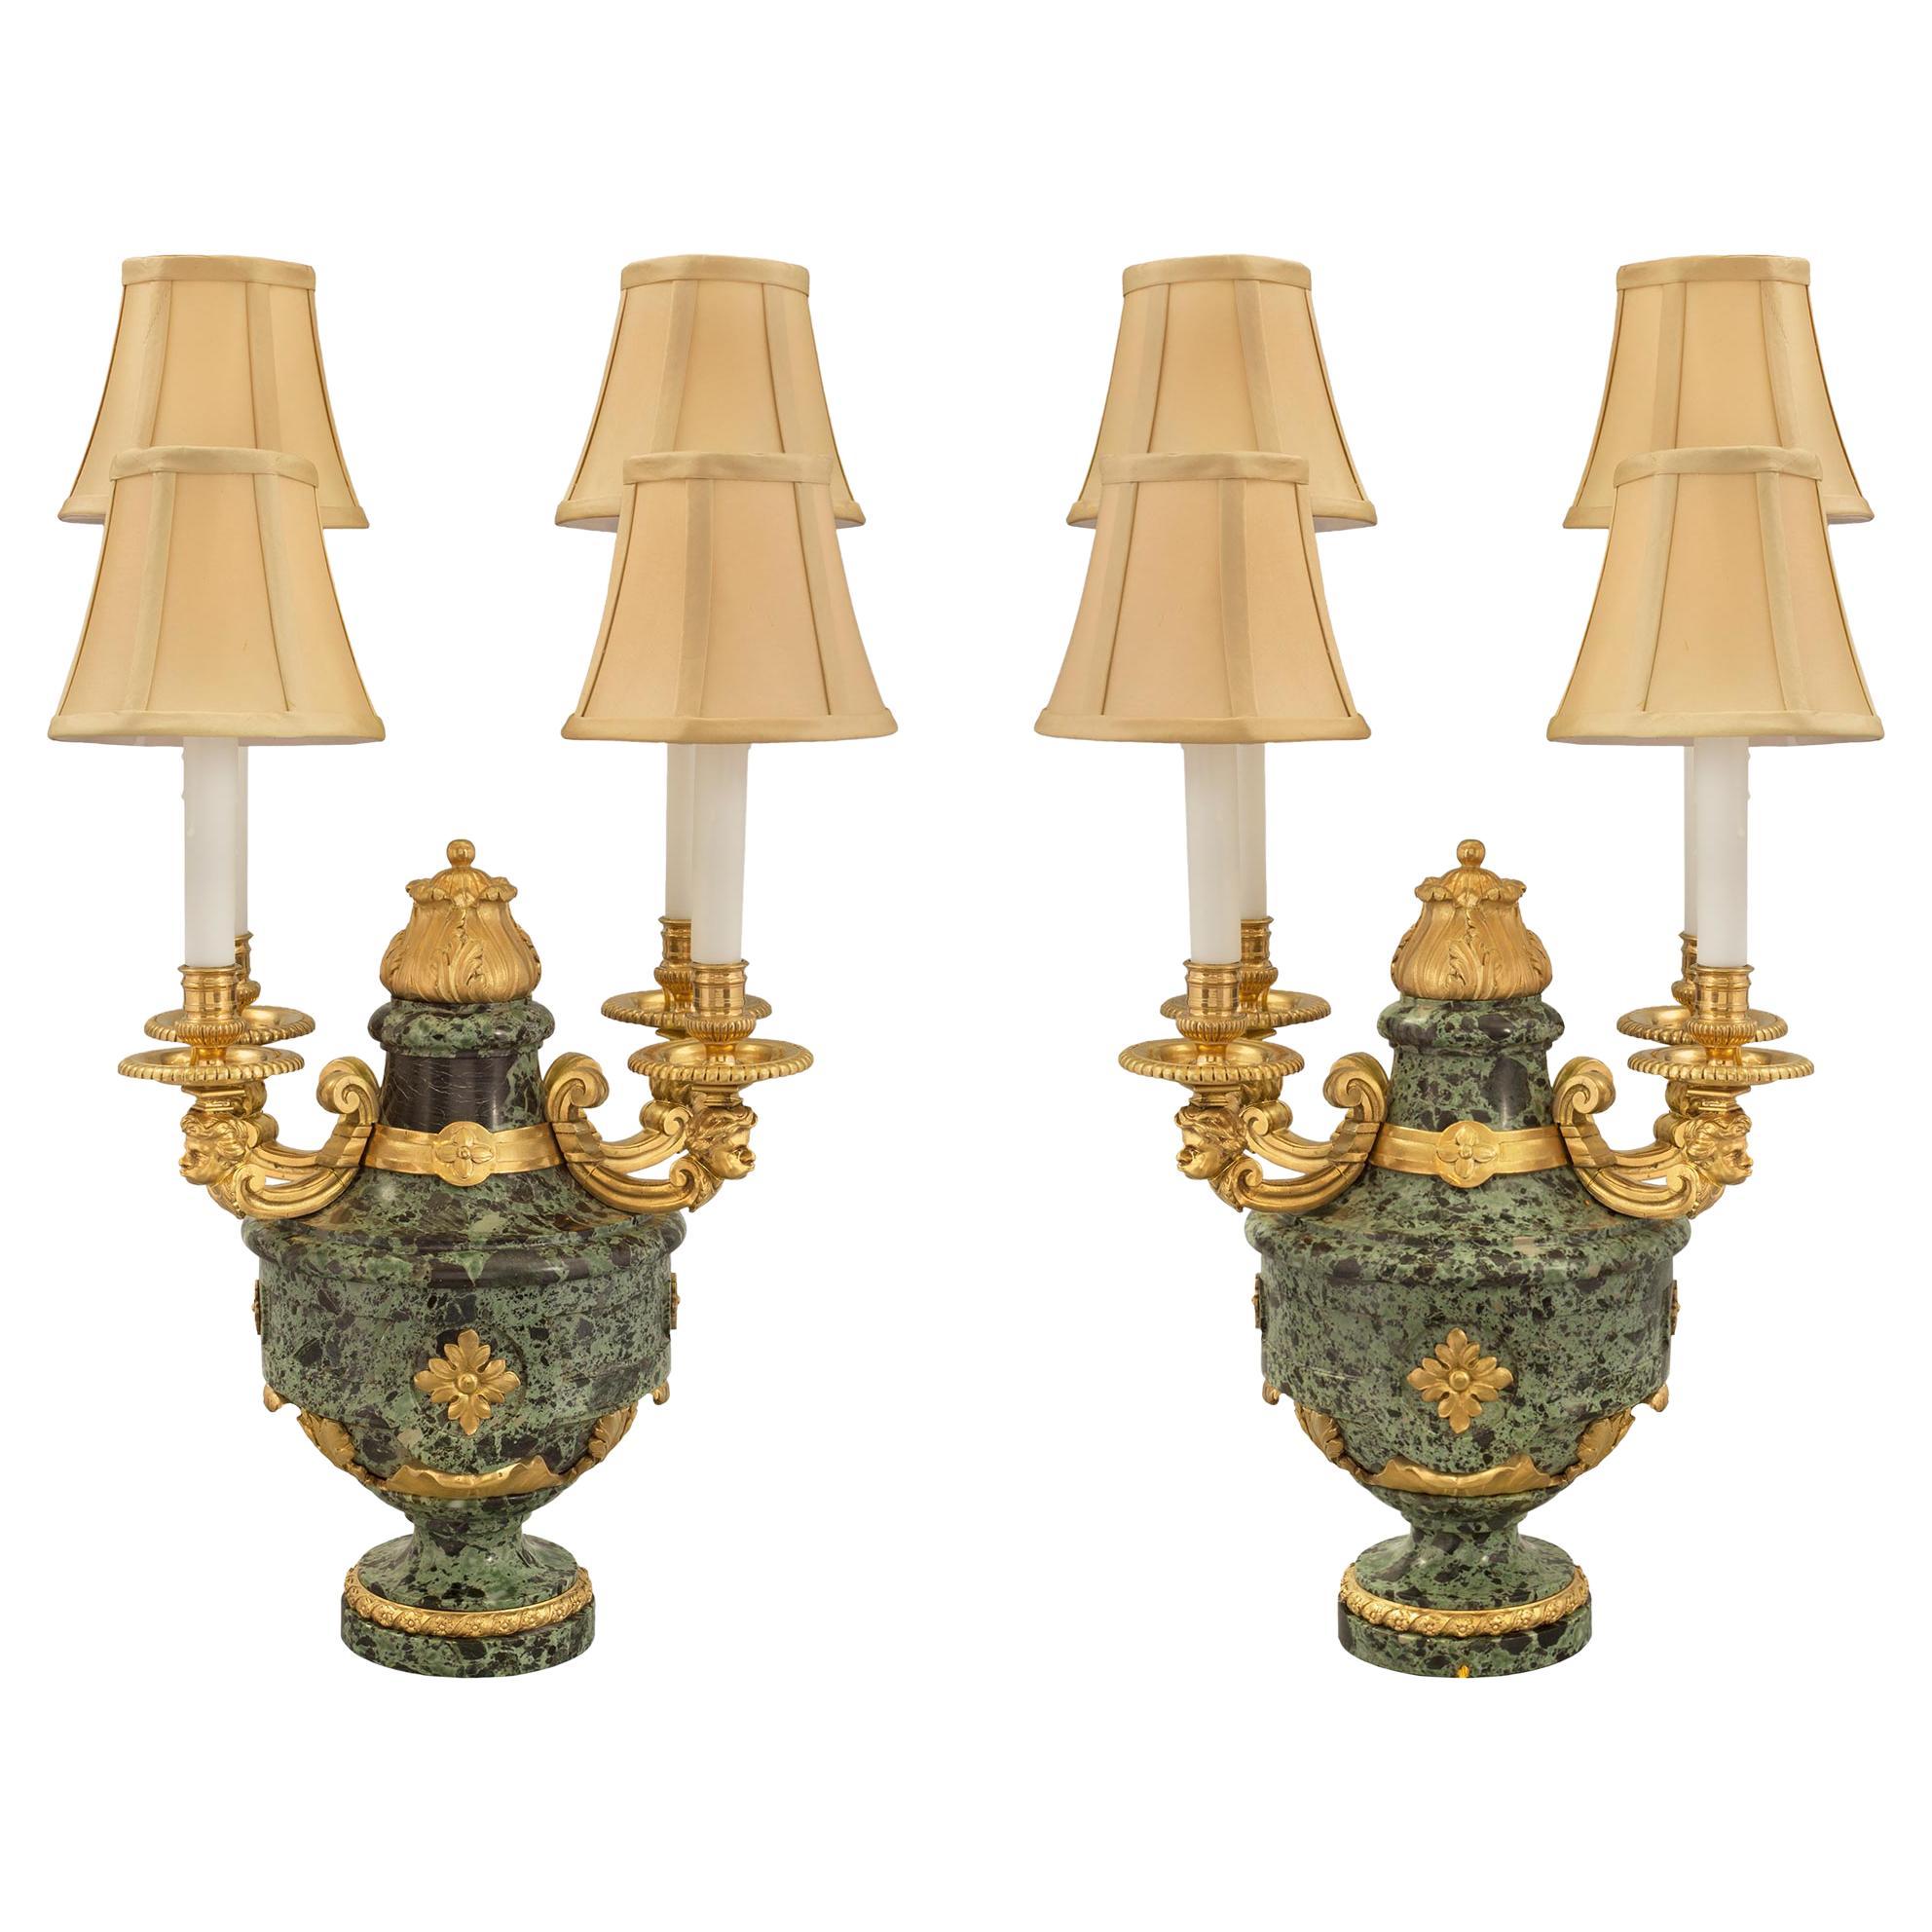 French 19th Century Louis XVI St. Belle Époque Period Marble and Ormolu Lamps For Sale